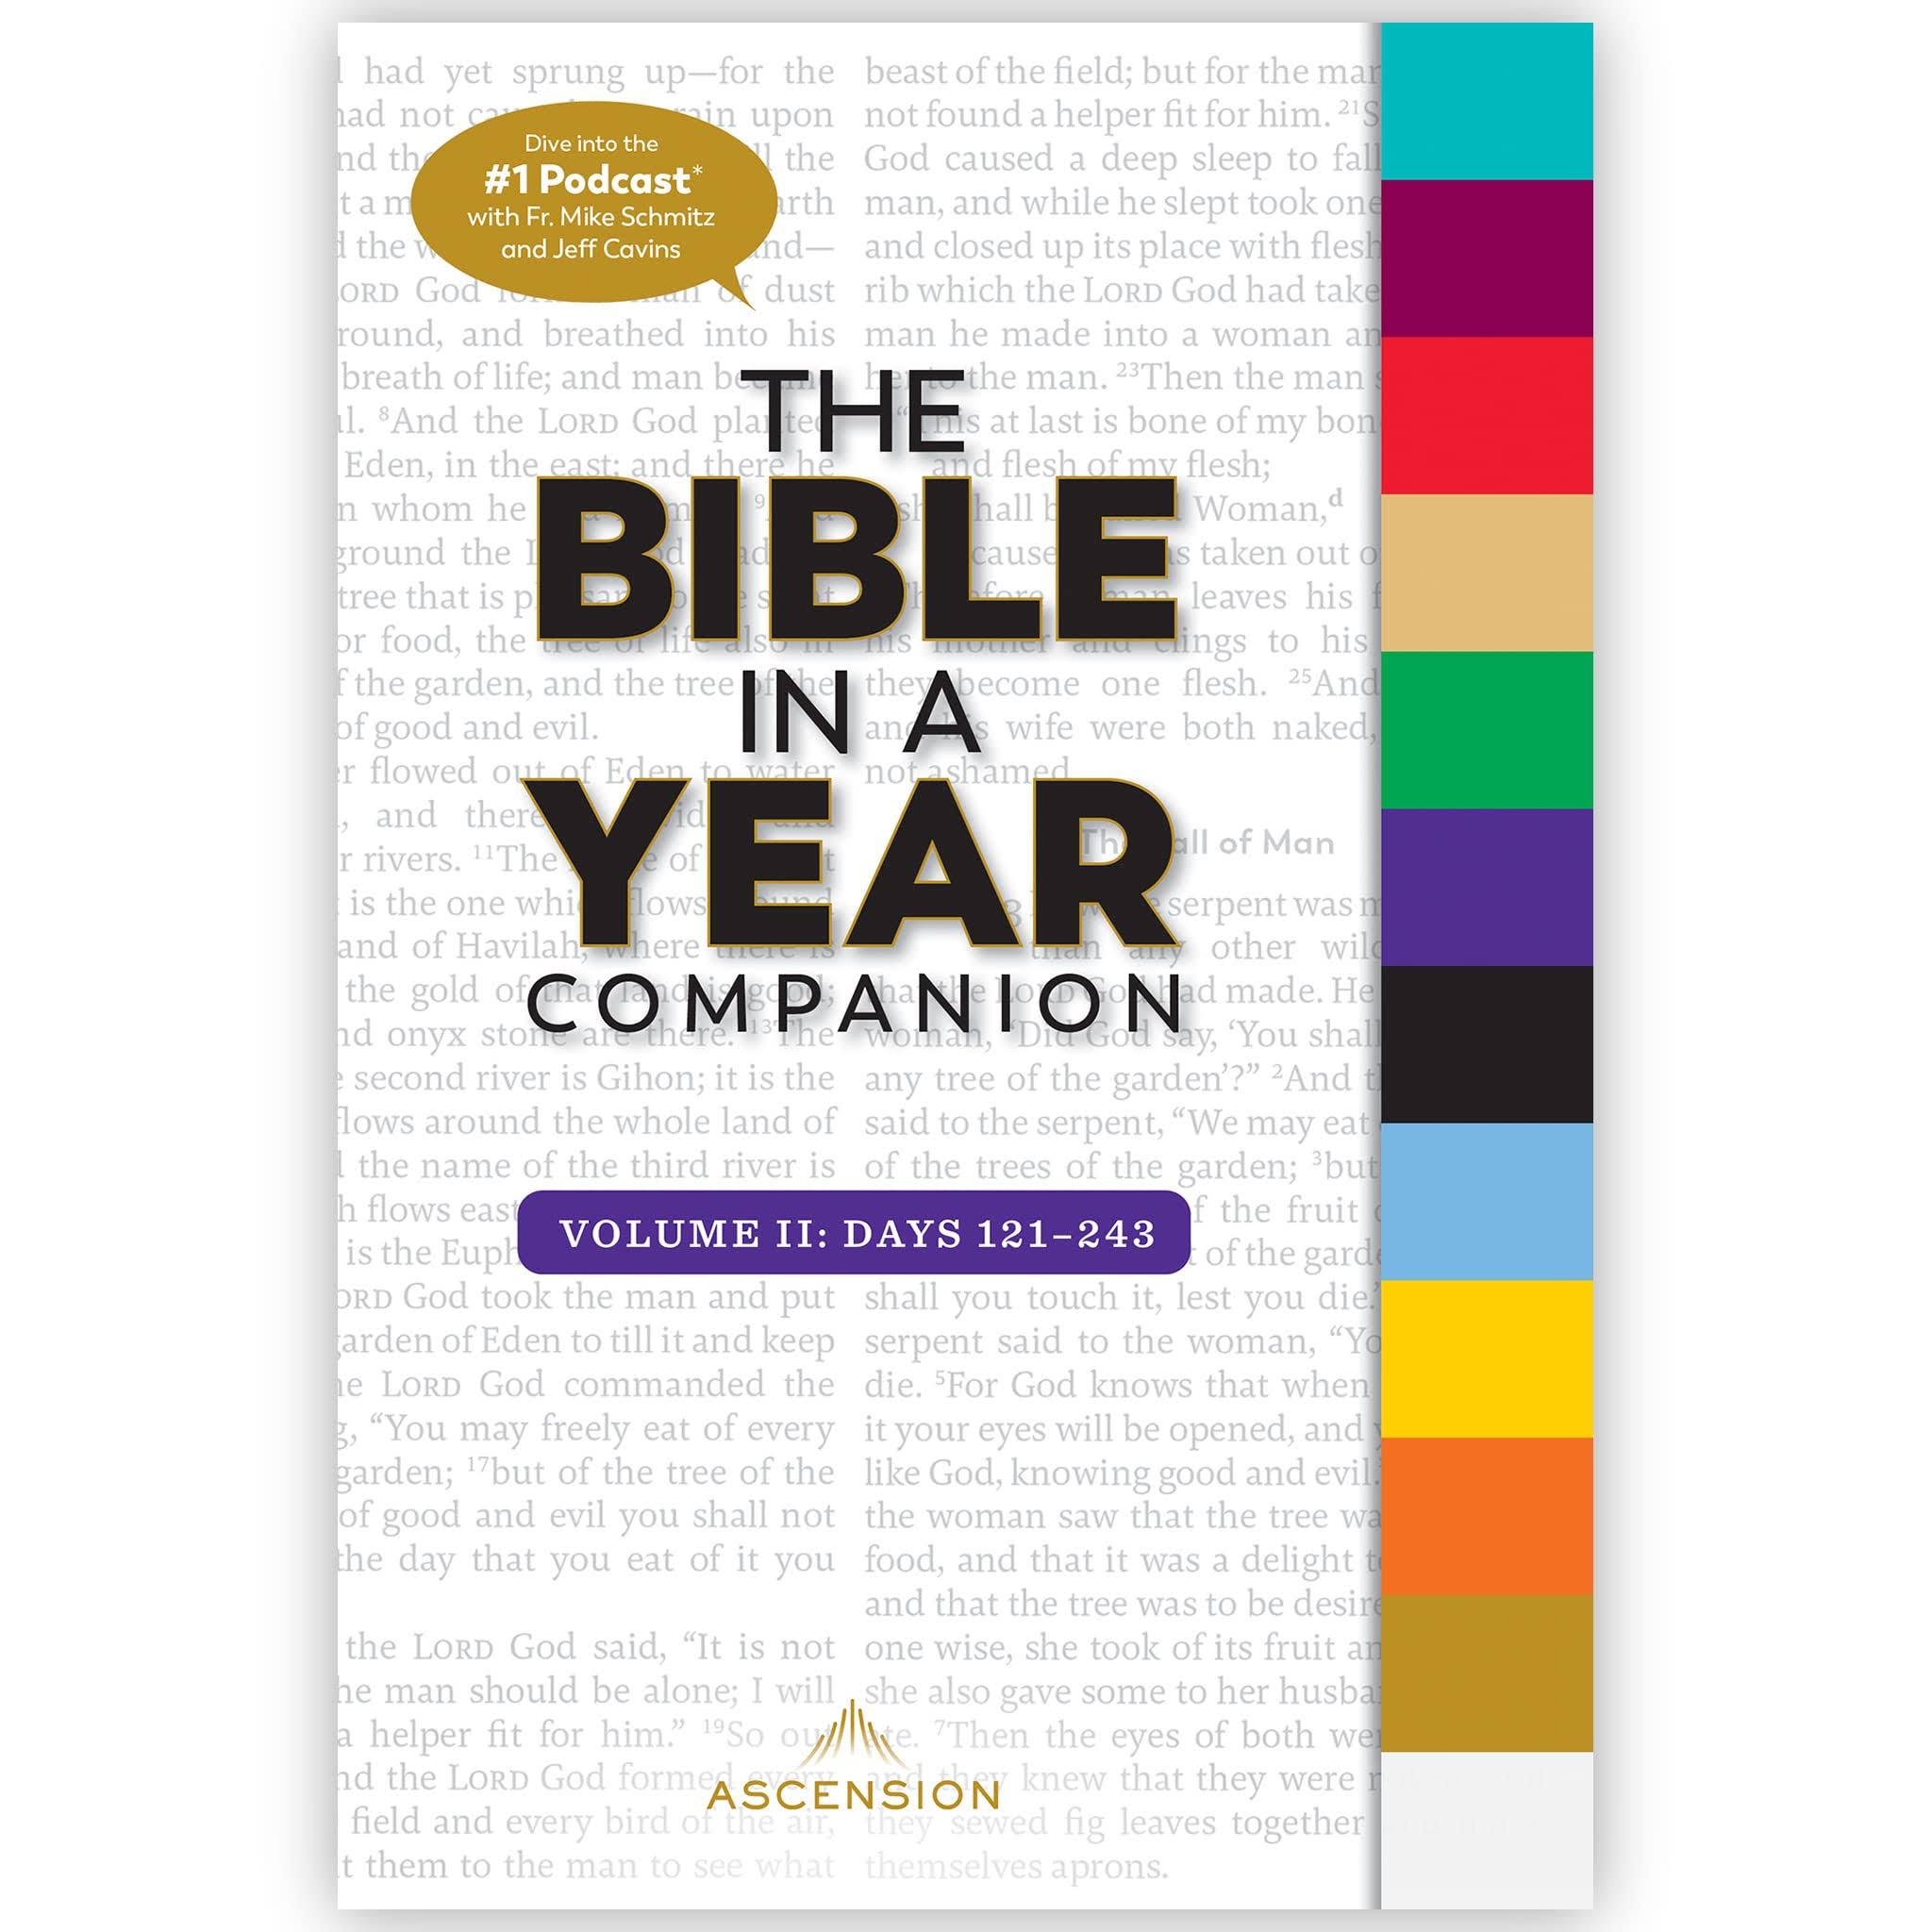 Bible in a Year Companion, Vol 2: Days 121-243